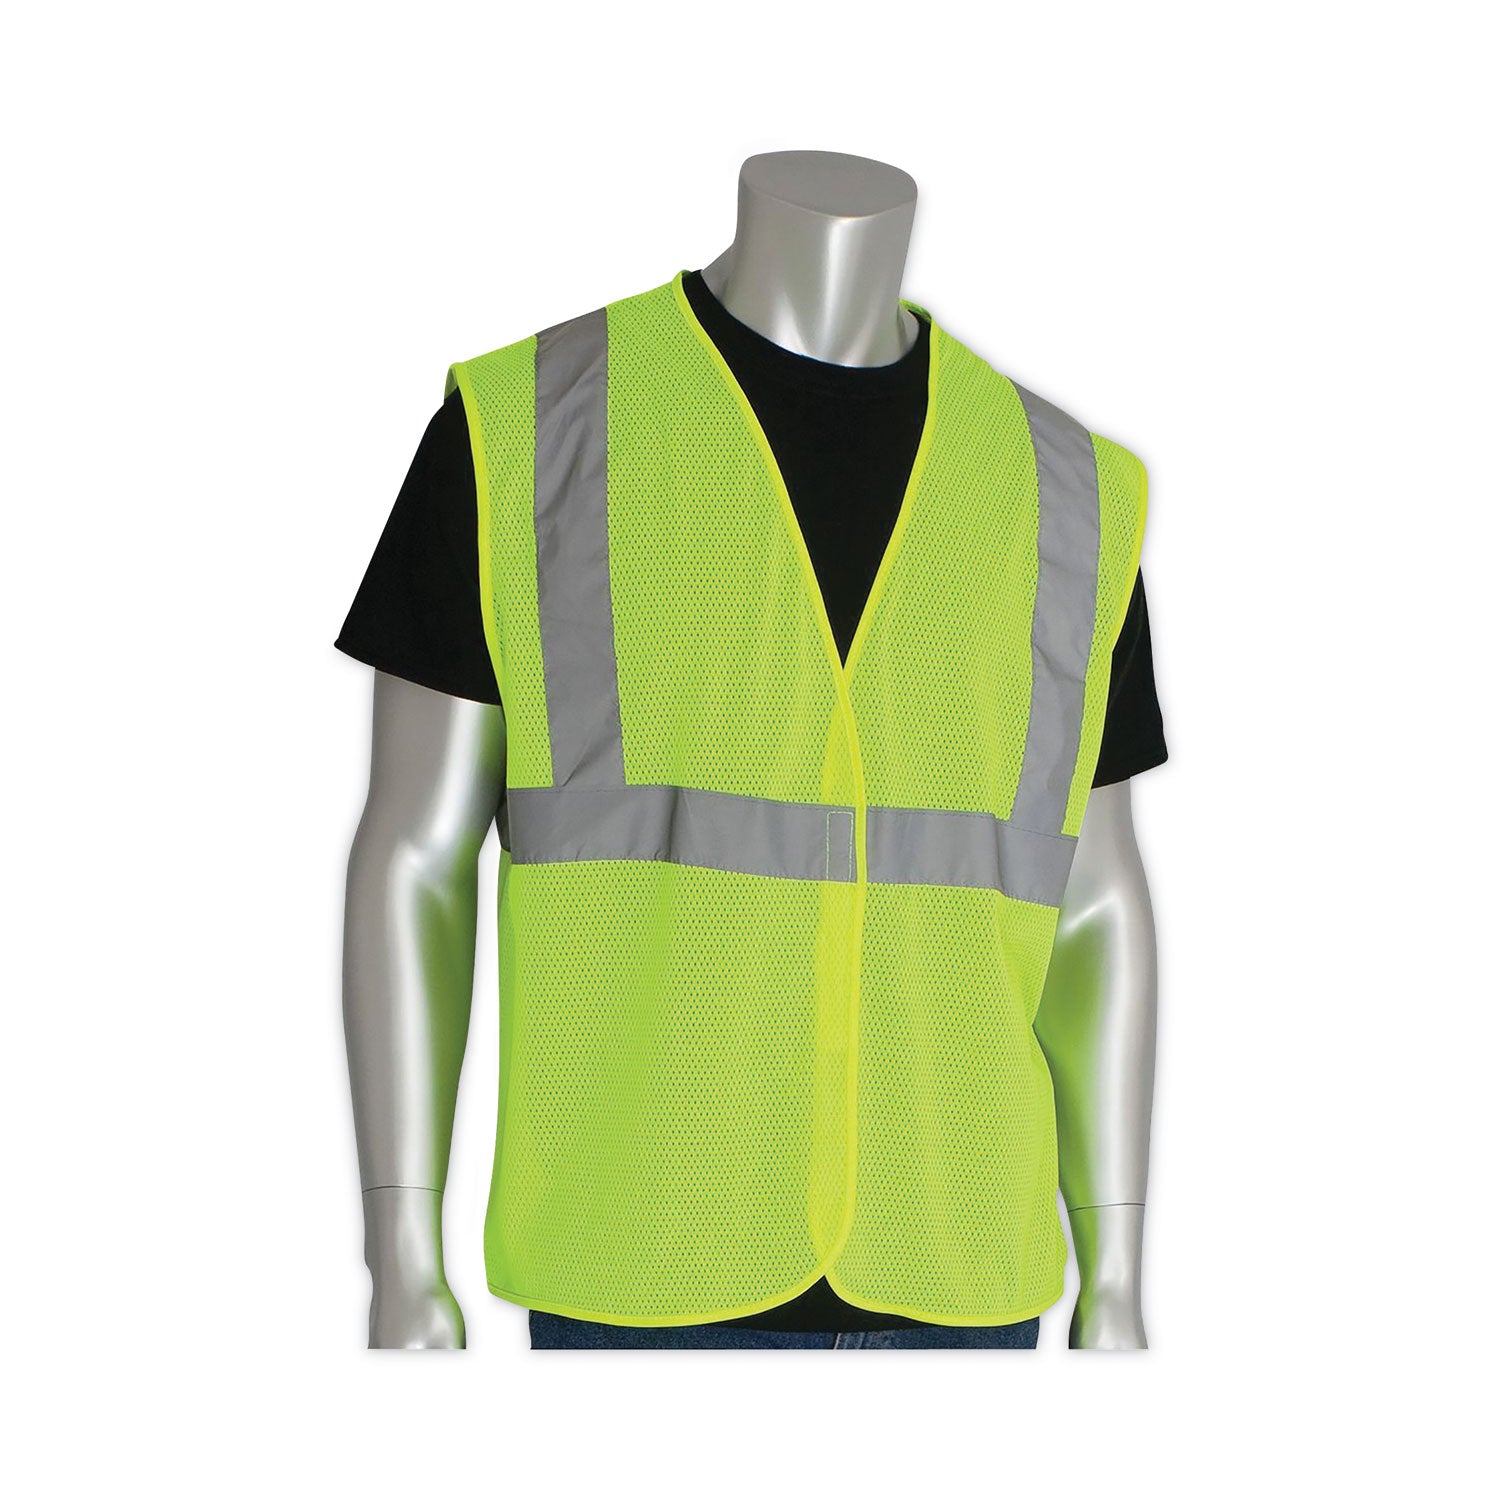 ansi-class-2-hook-and-loop-safety-vest-2x-large-hi-viz-lime-yellow_pid302mvgly2x - 2